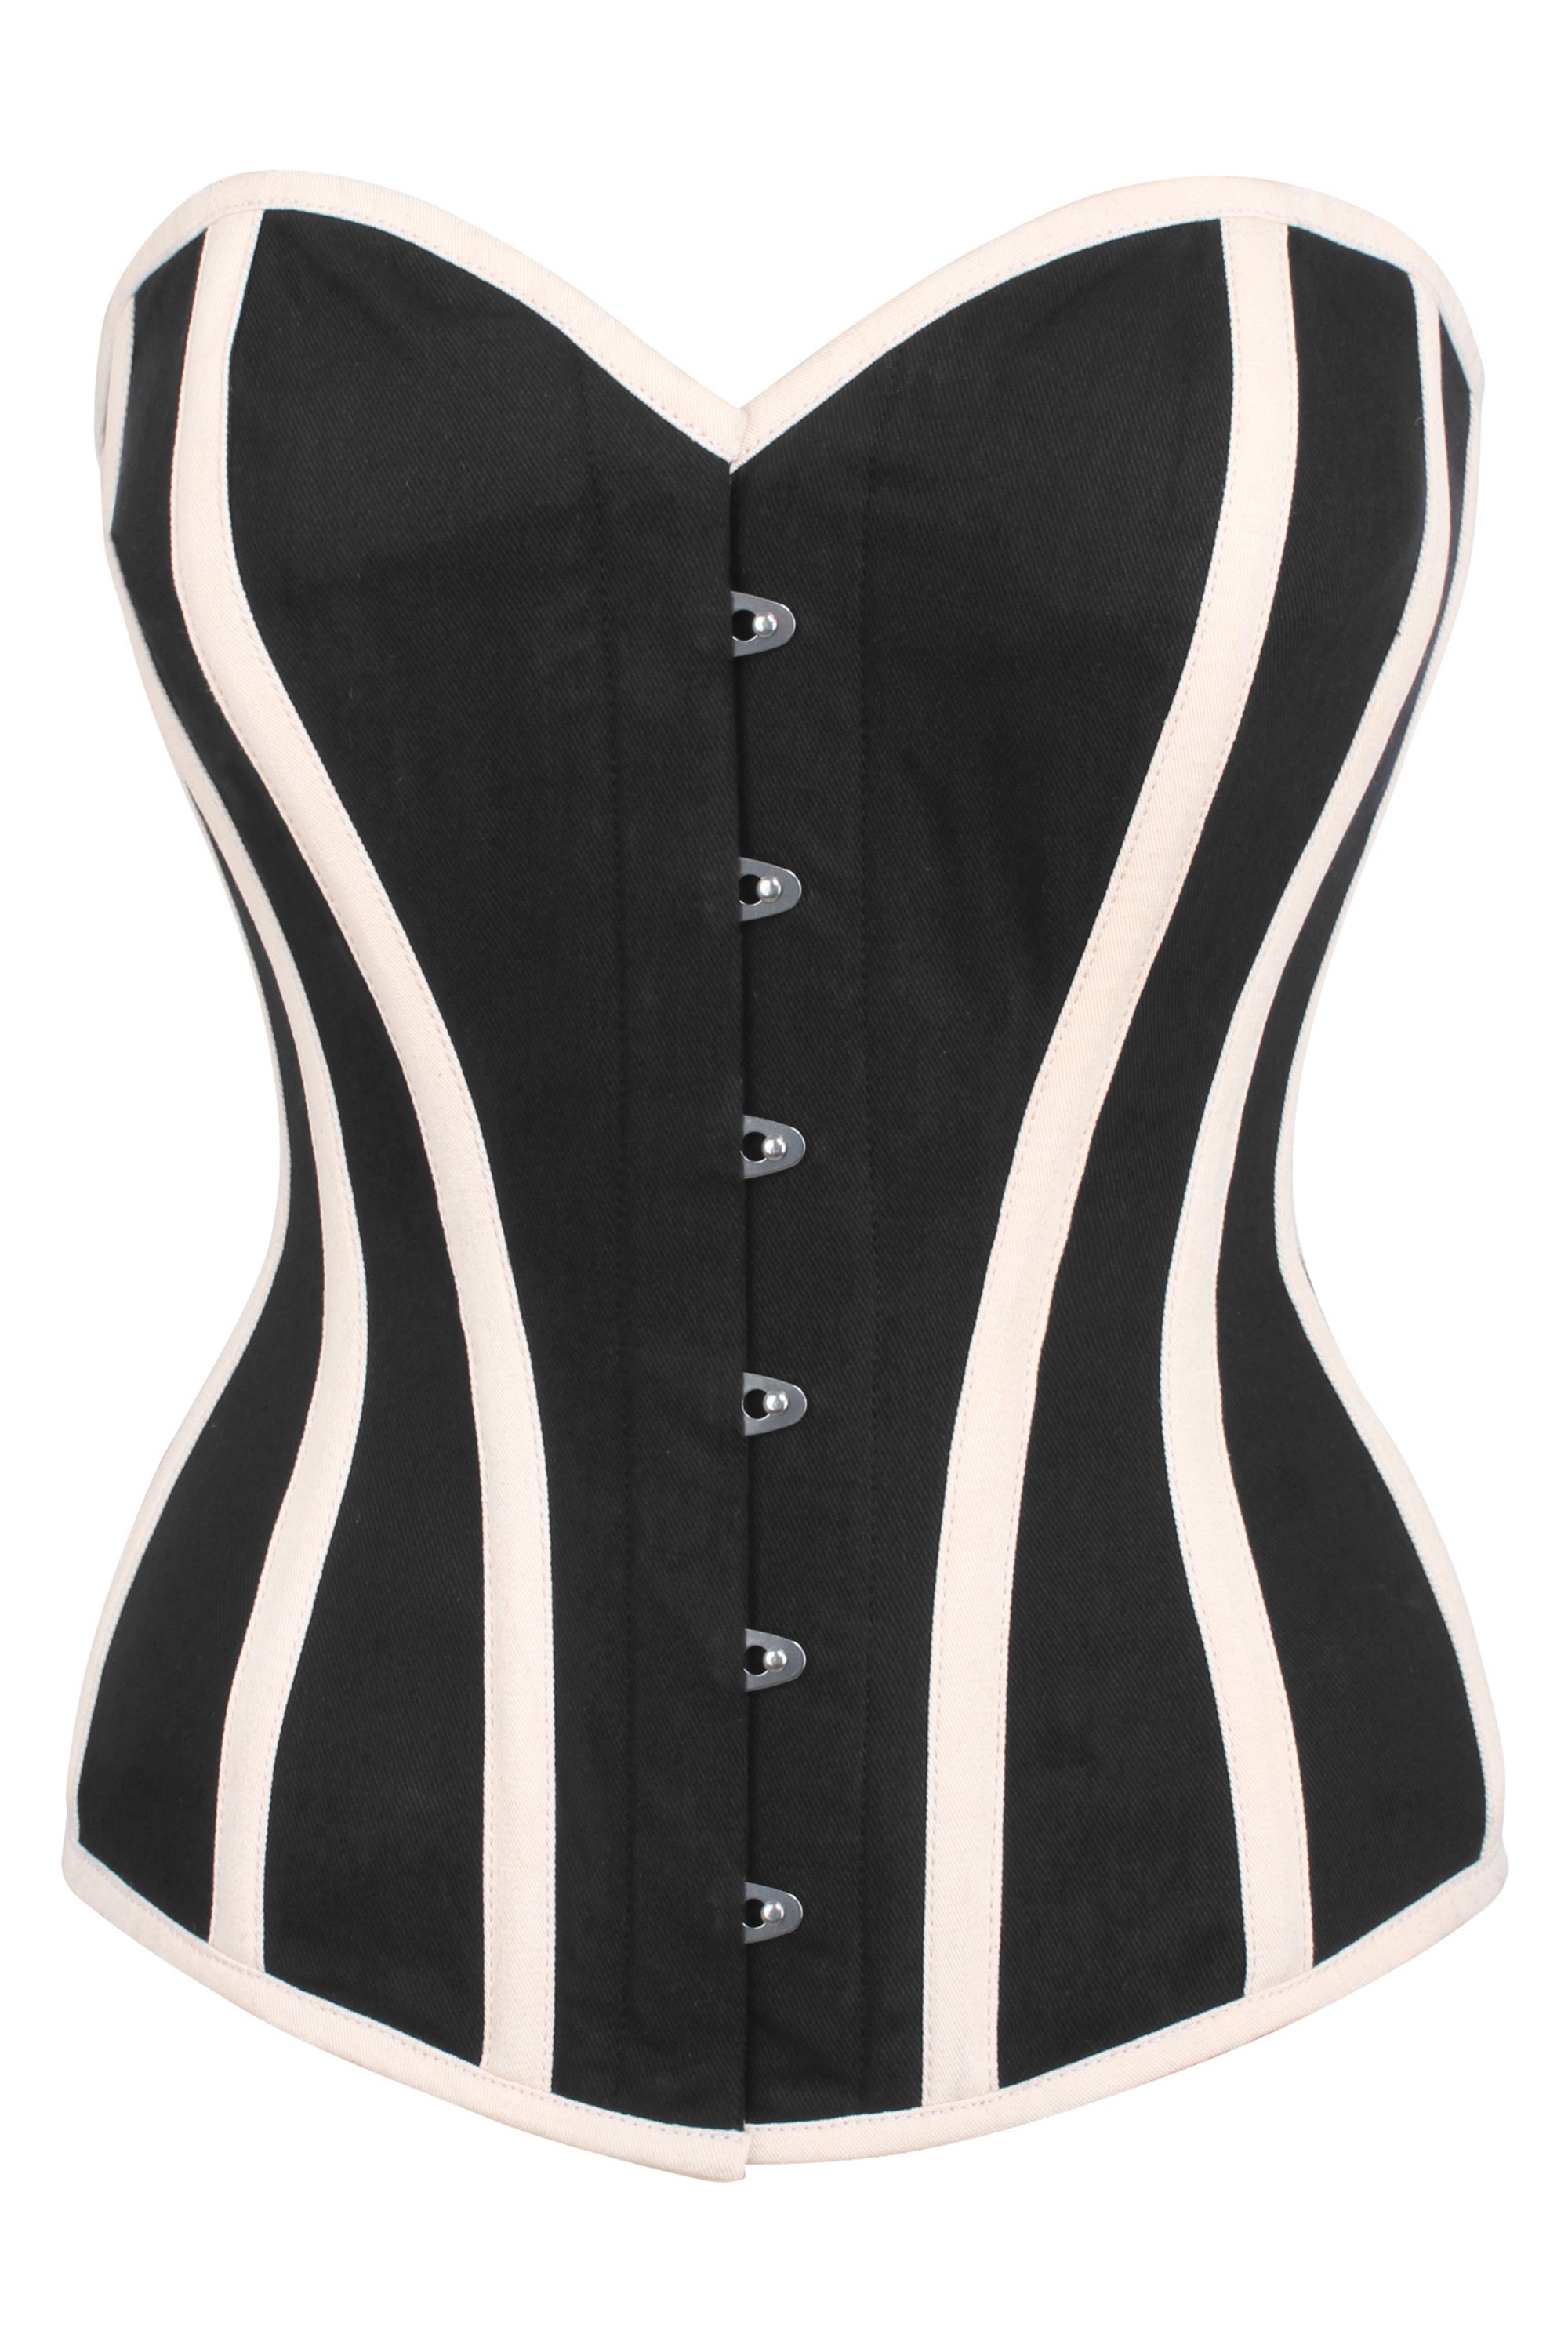 Single Layer Black and Beige Overbust Corset